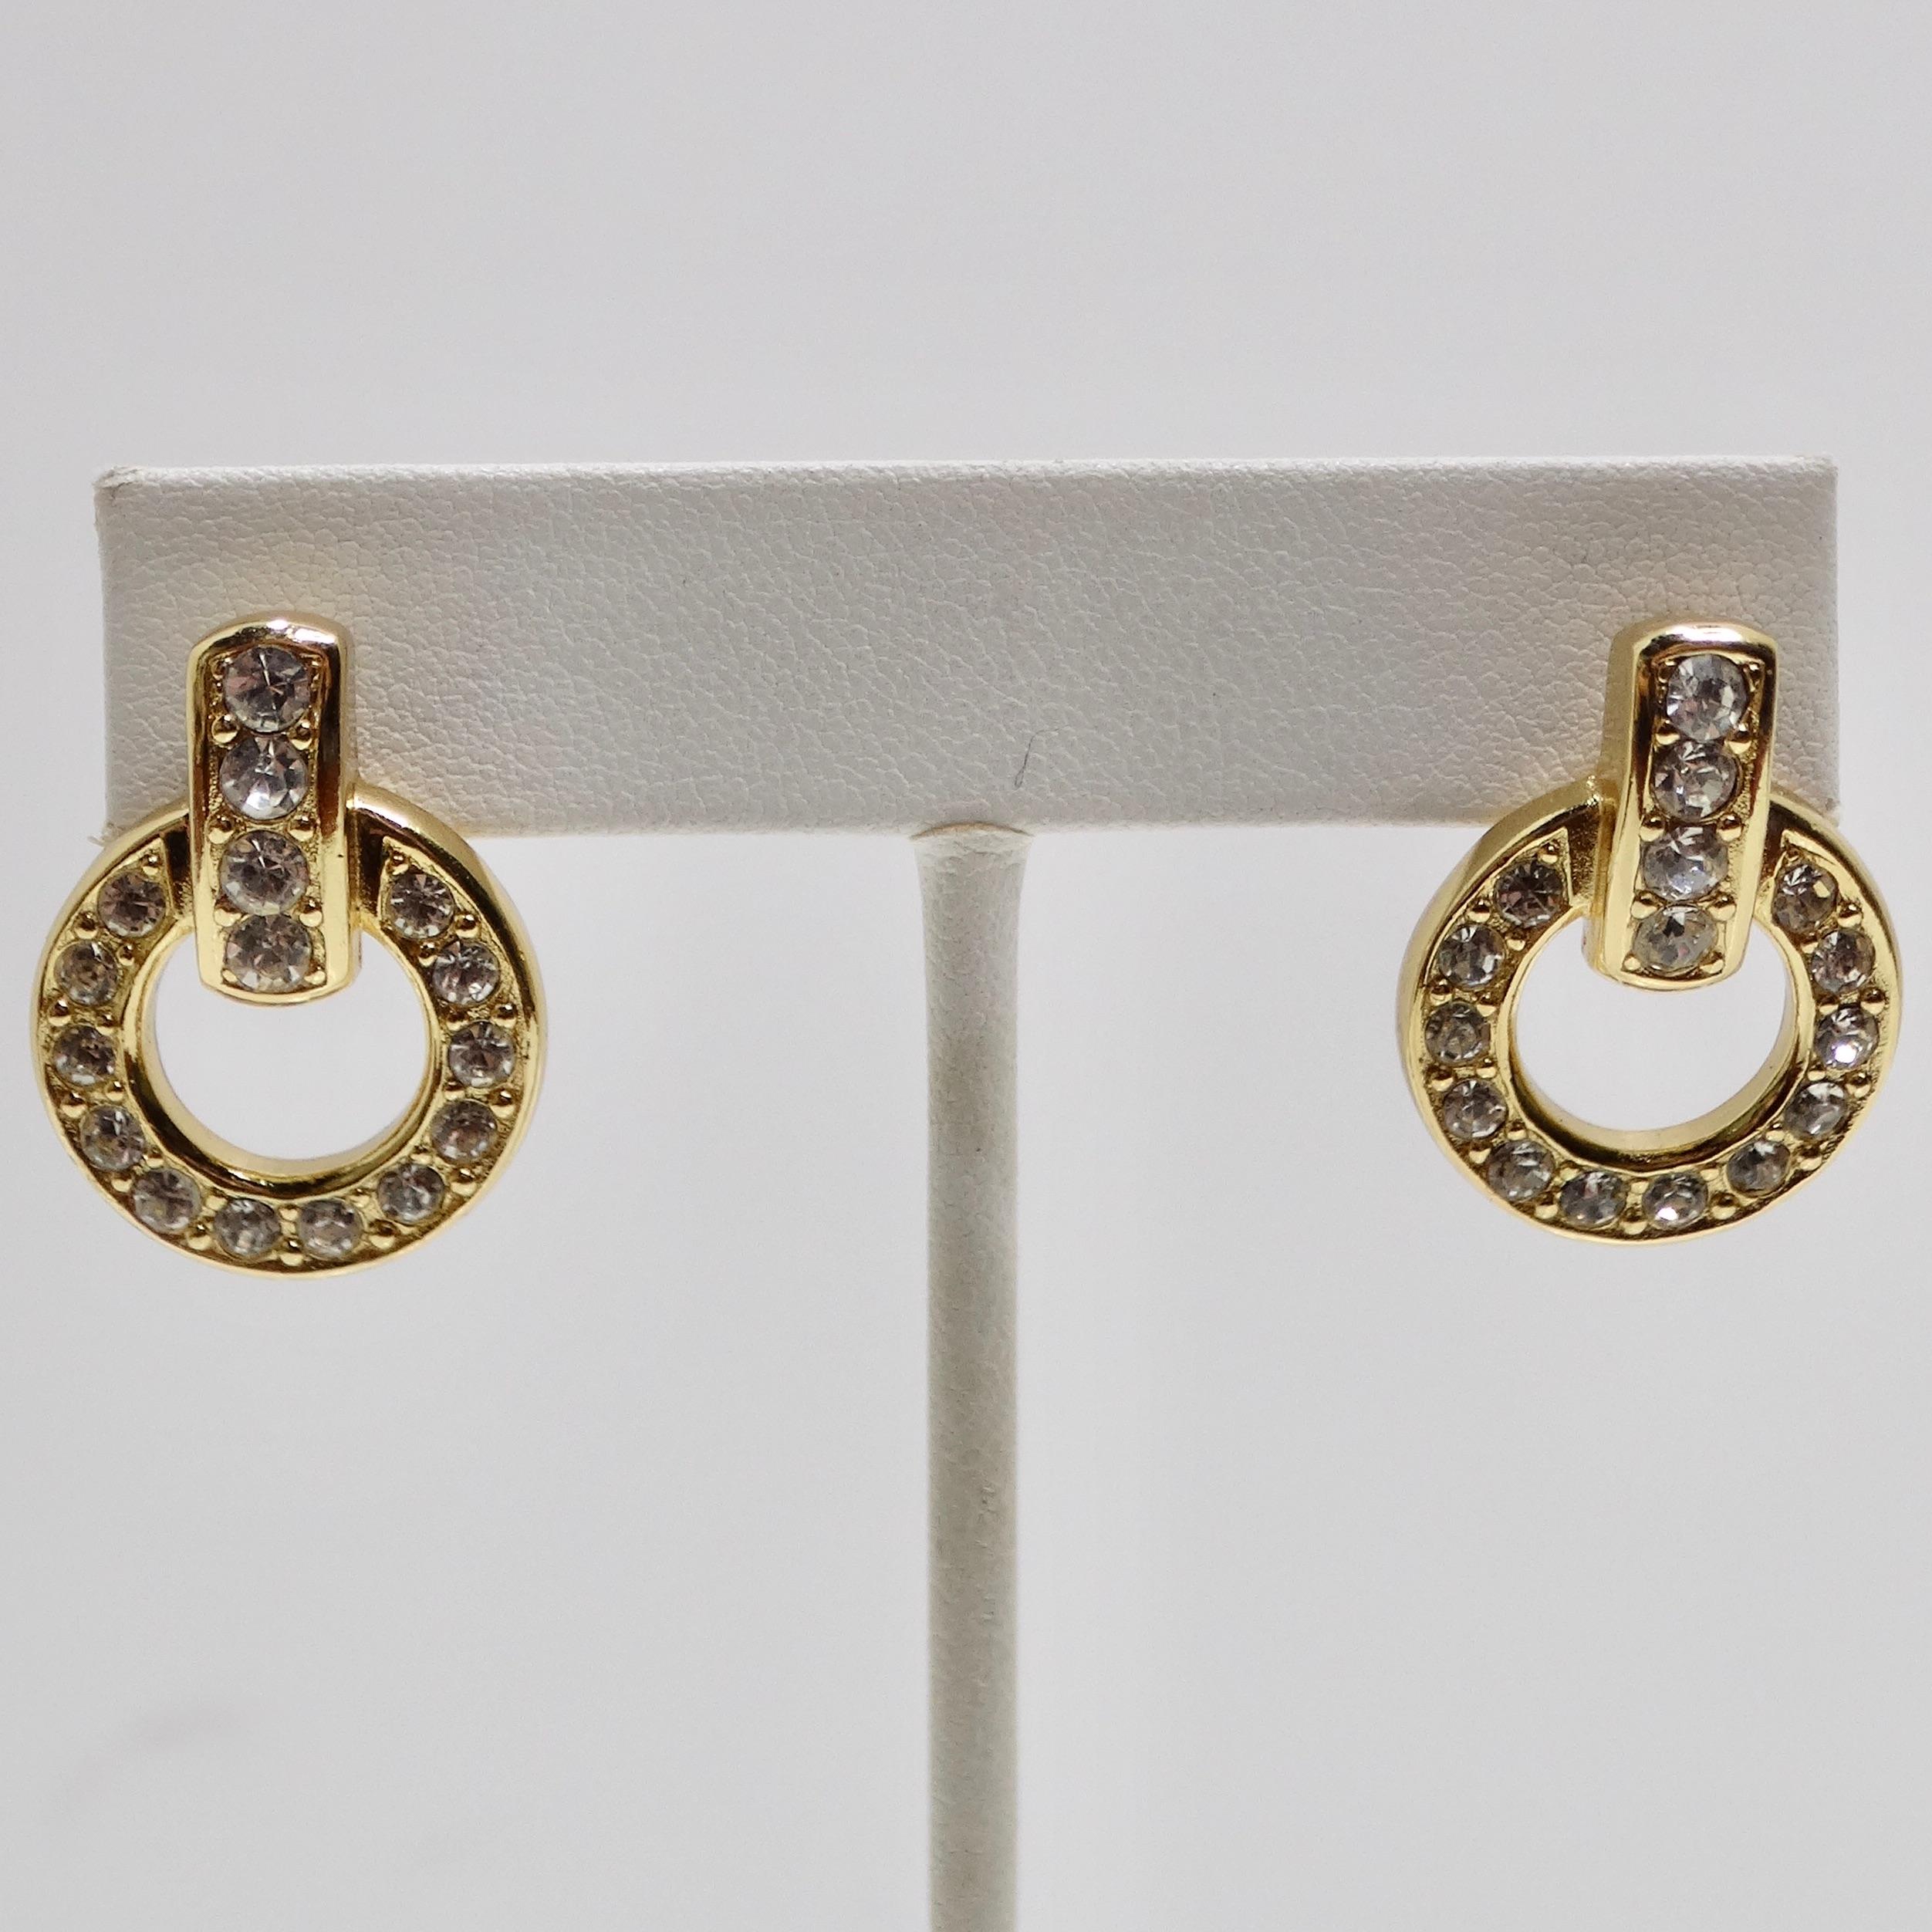 Christian Dior Vintage 18K Gold Plated Rhinestone Earrings In Good Condition For Sale In Scottsdale, AZ